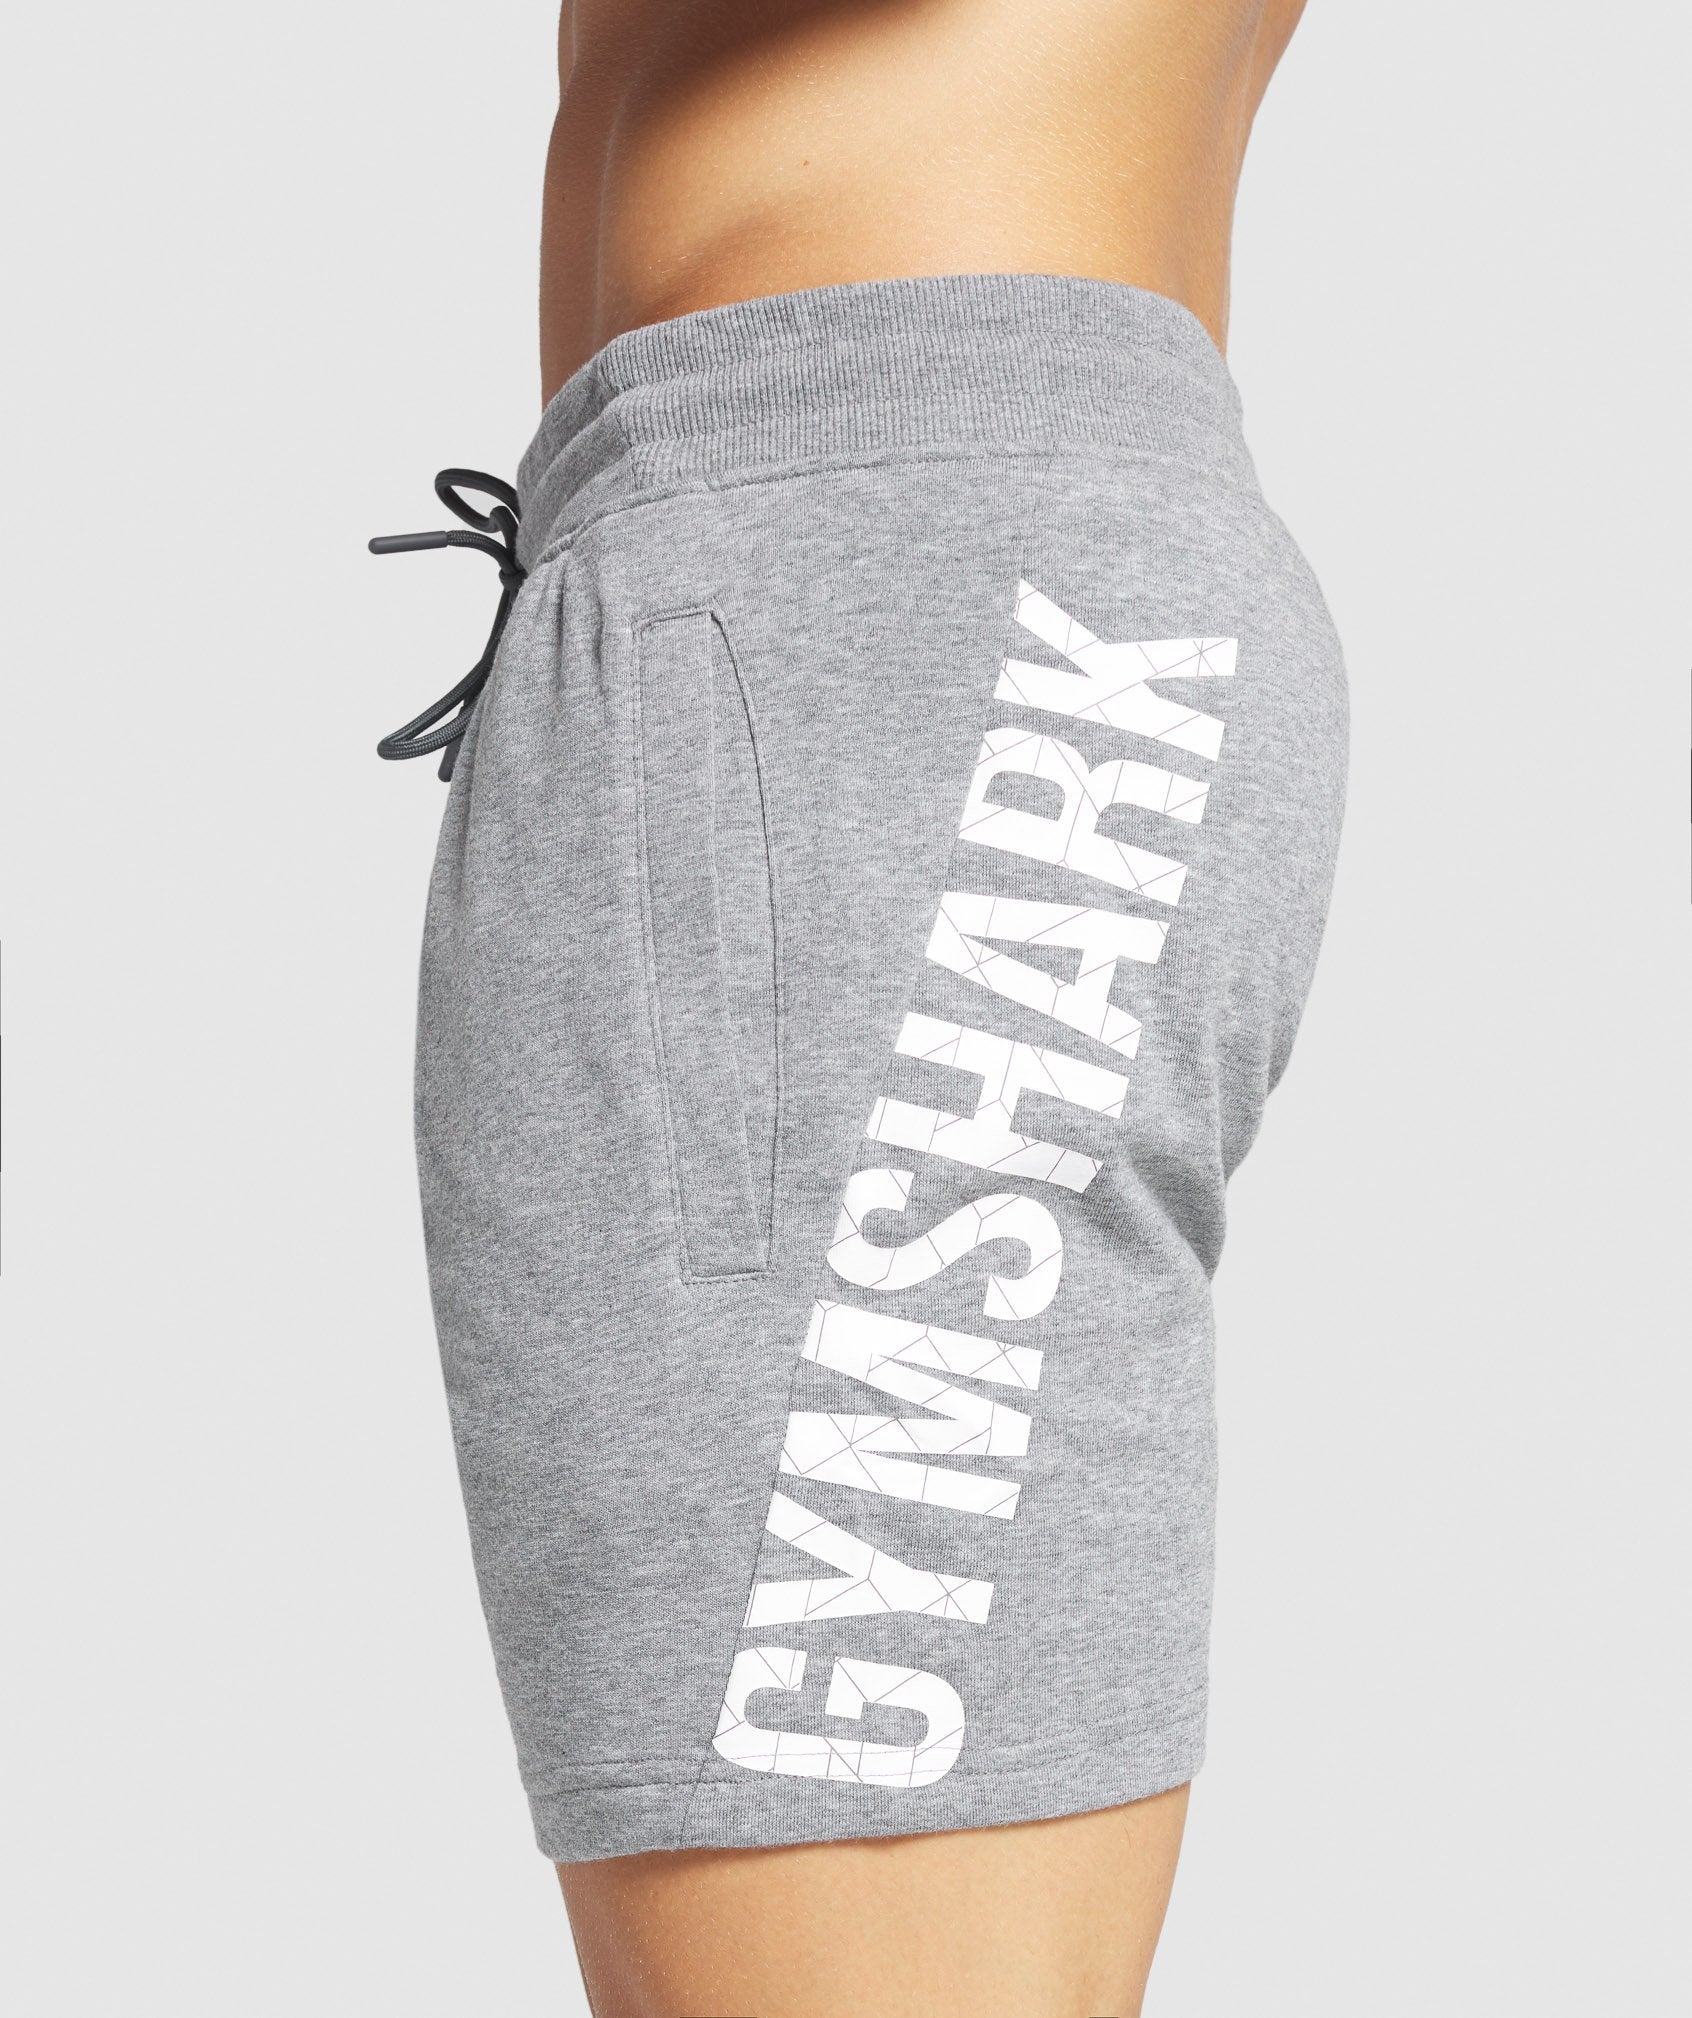 Bold Shorts in Charcoal Marl